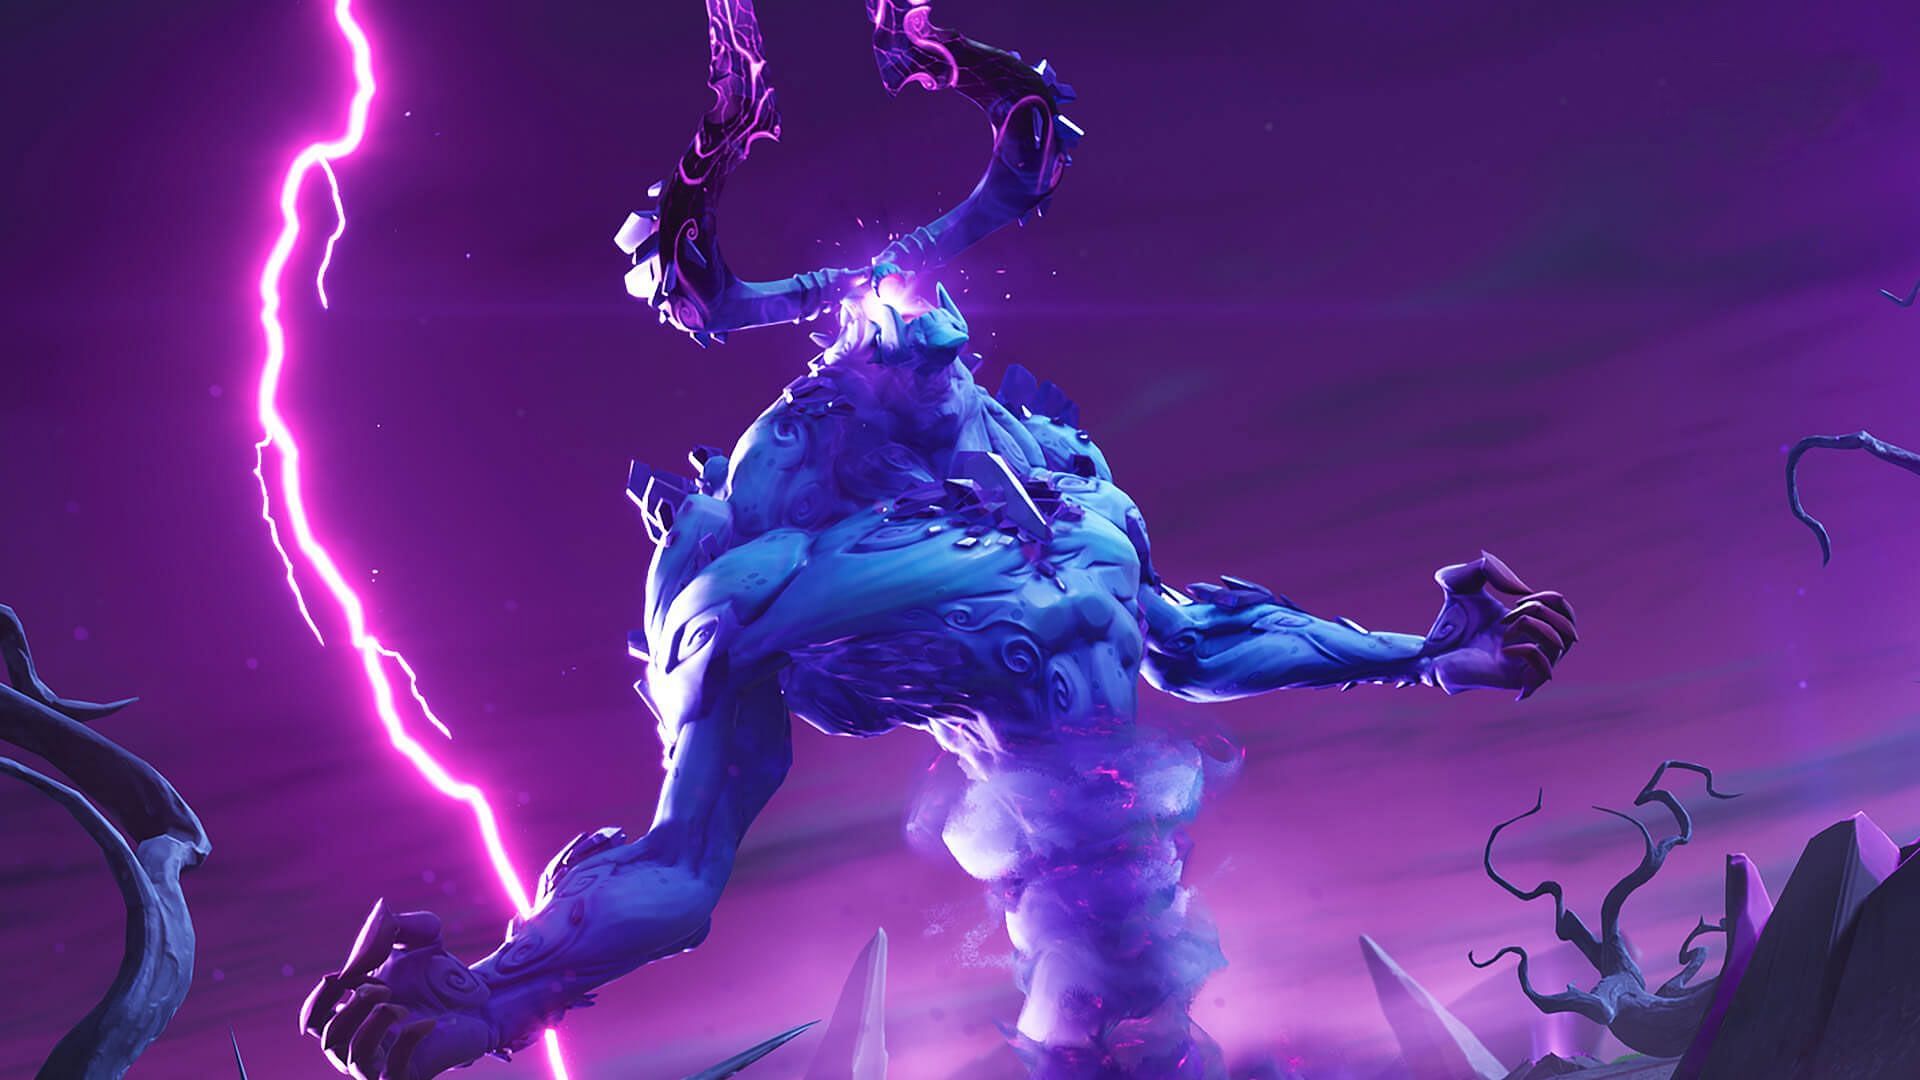 The next Fortnite update will most likely reveal the upcoming Halloween boss (Image via Epic Games)